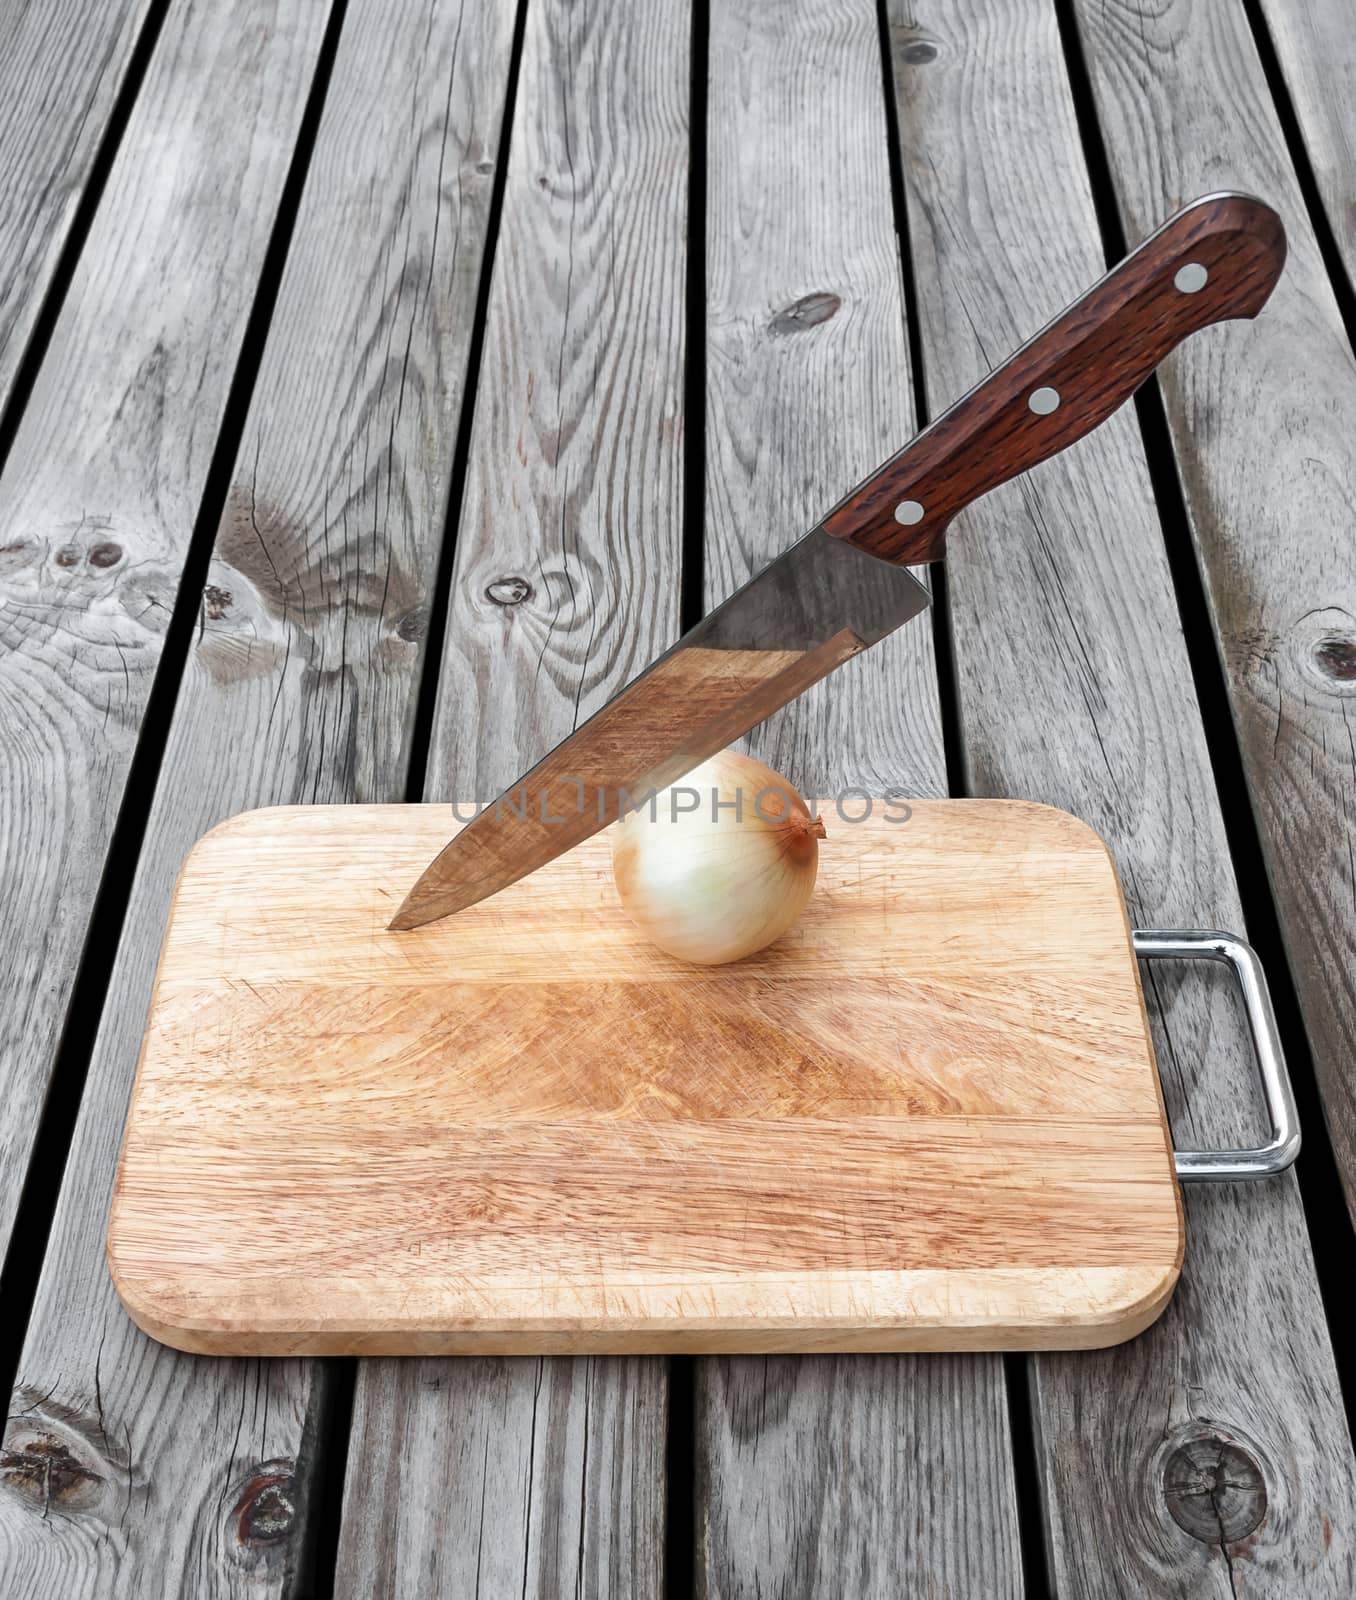 Knife,onion and a cutting board  on a wooden table